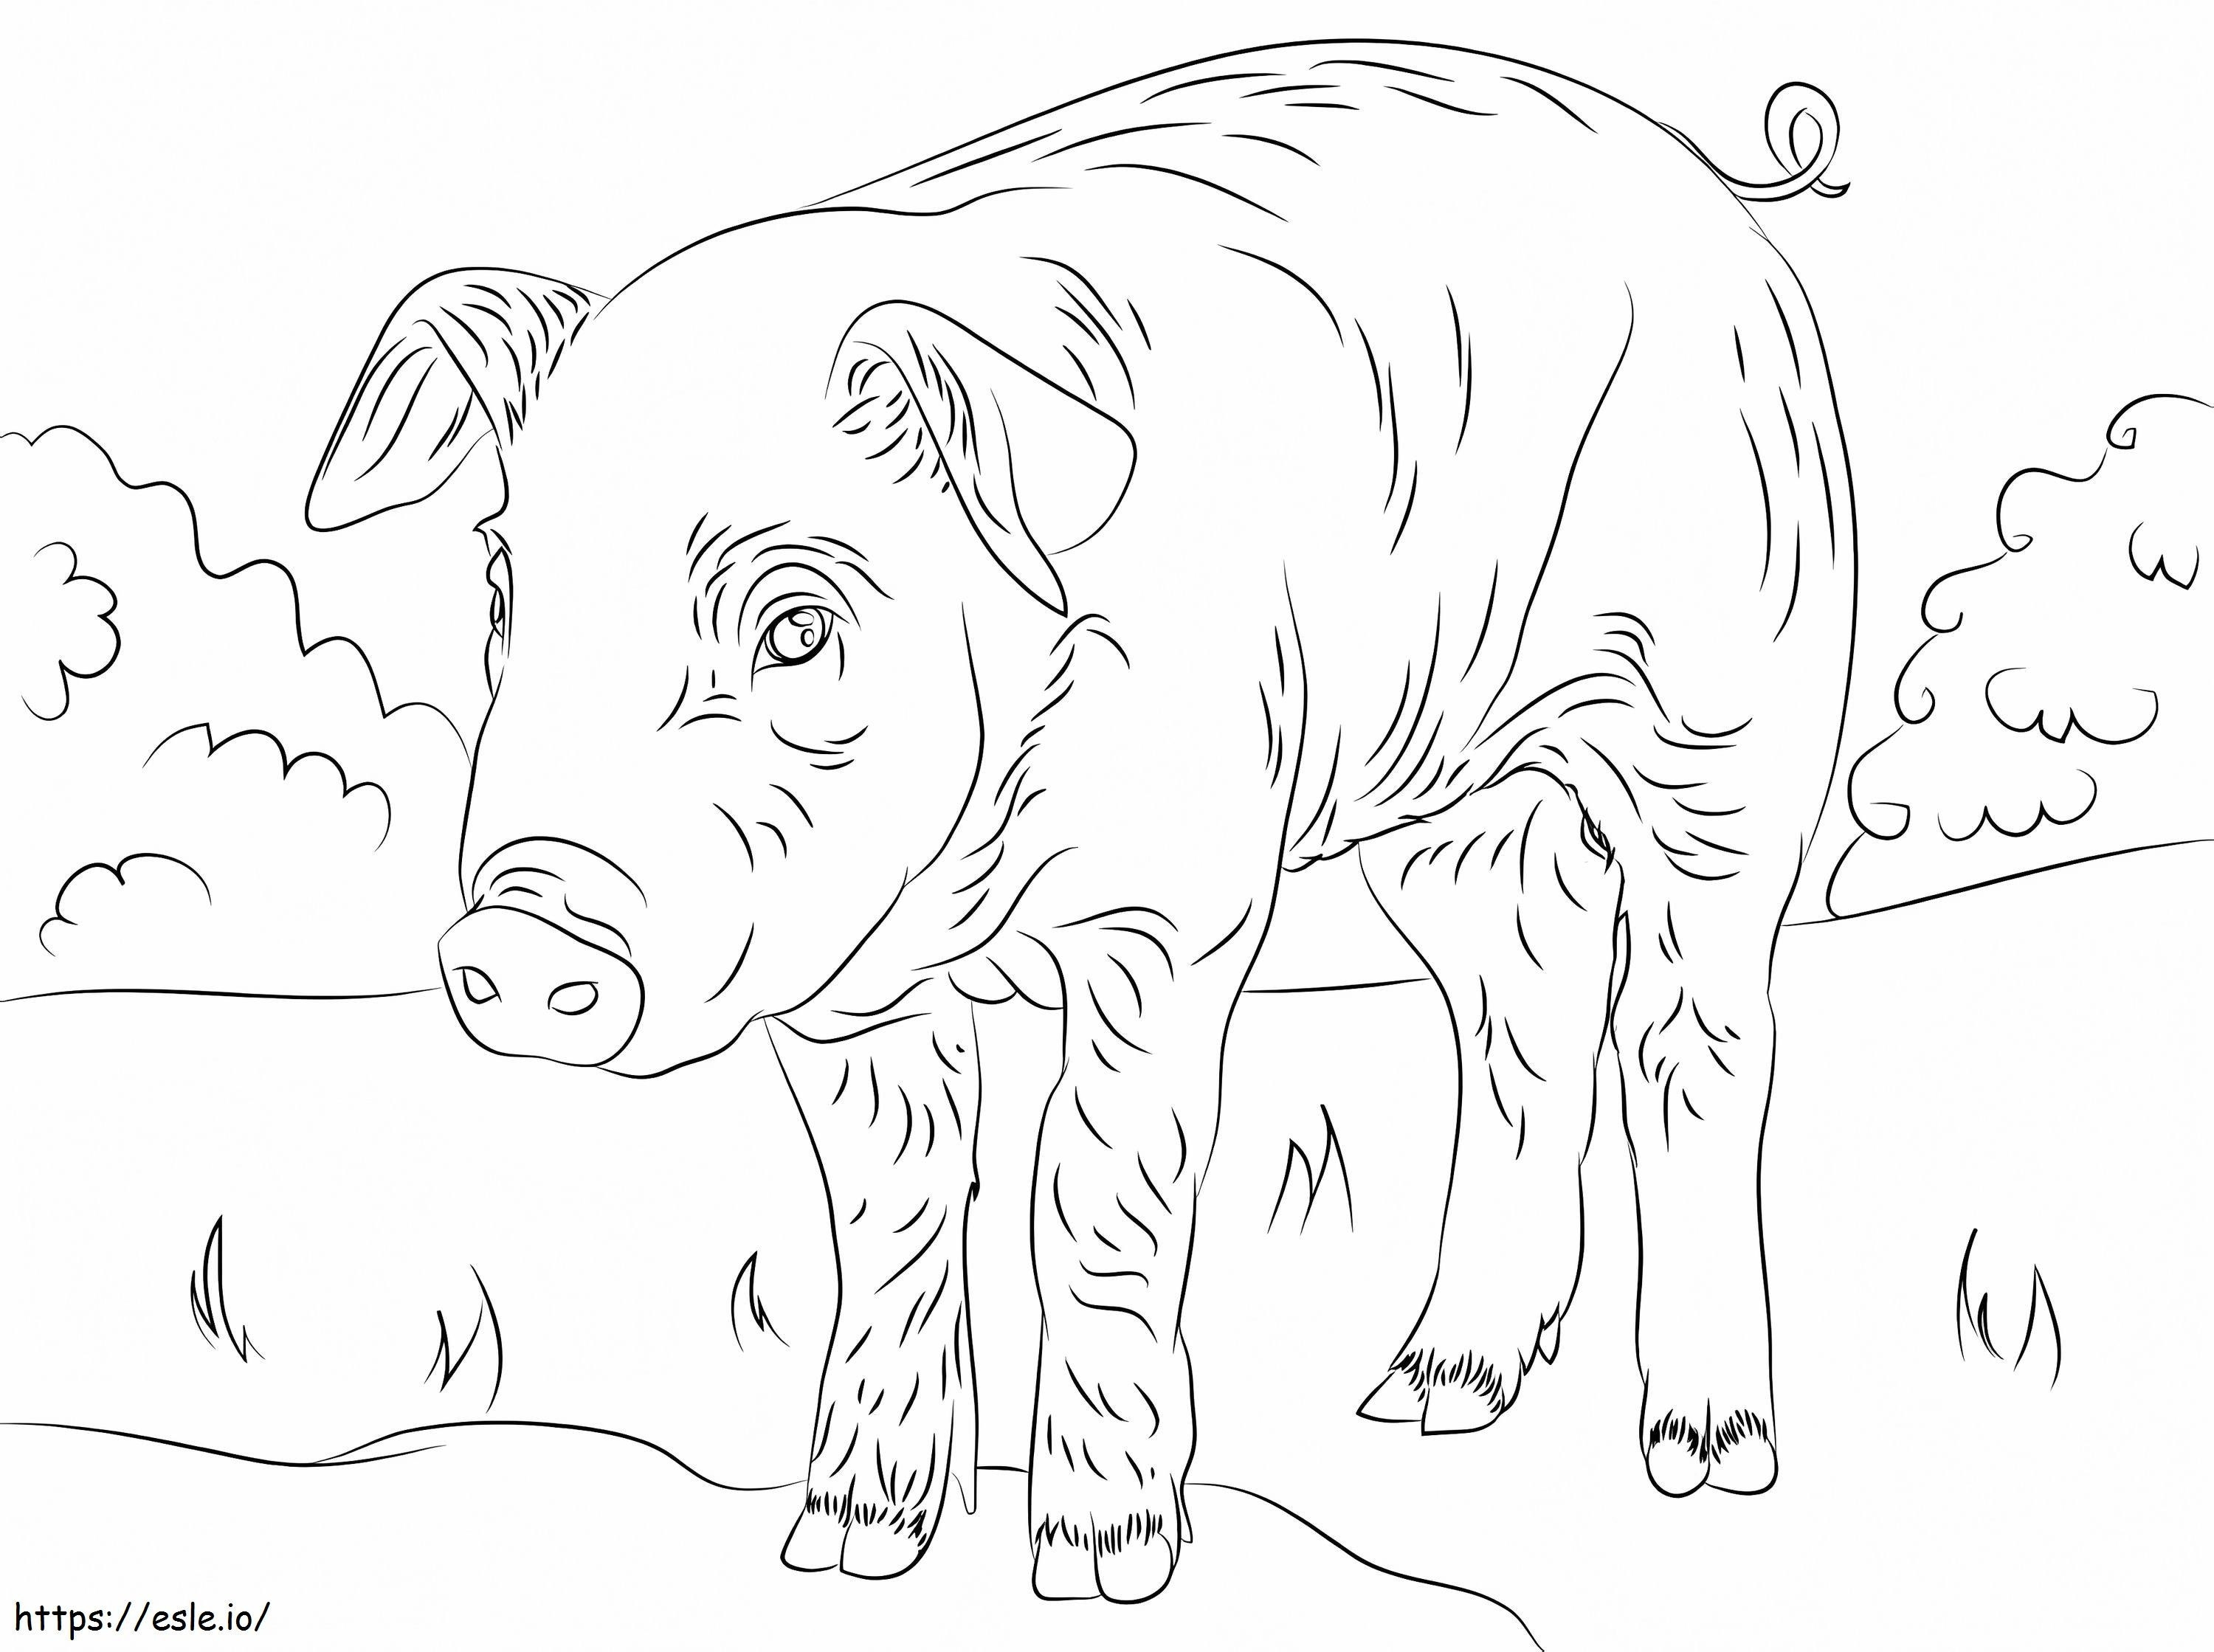 Cute Piglet coloring page